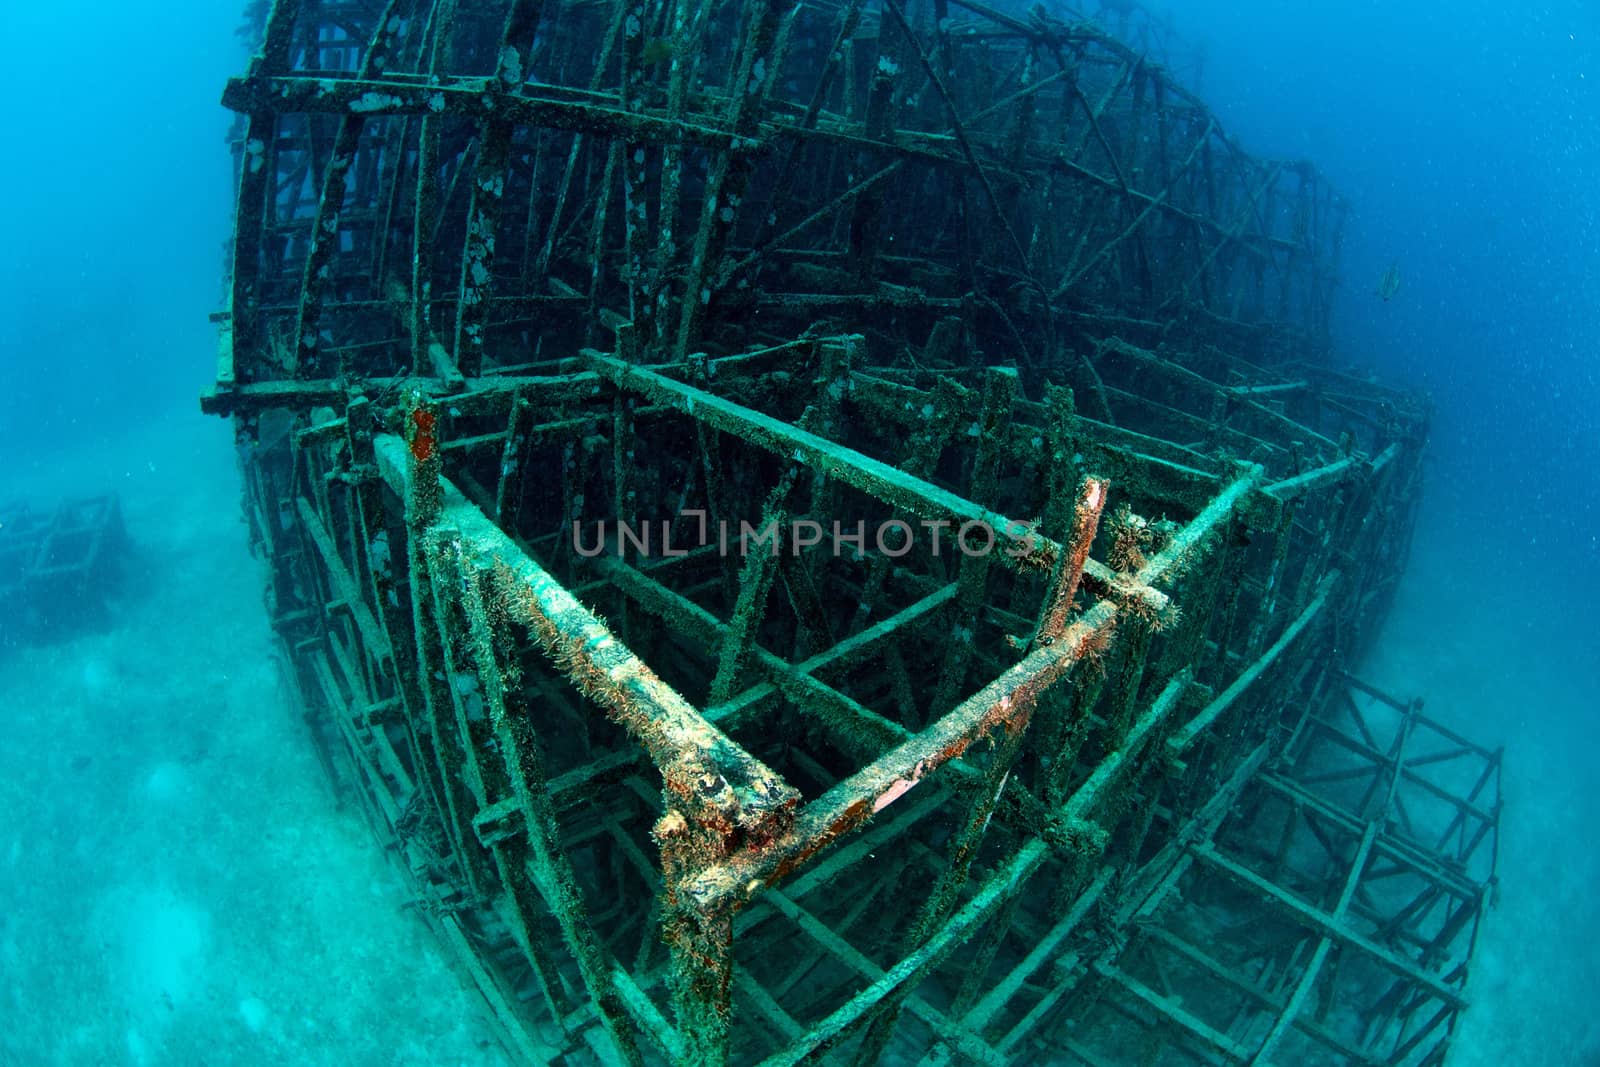 artificial reef in Mabul, kapalai, Malaysia by think4photop